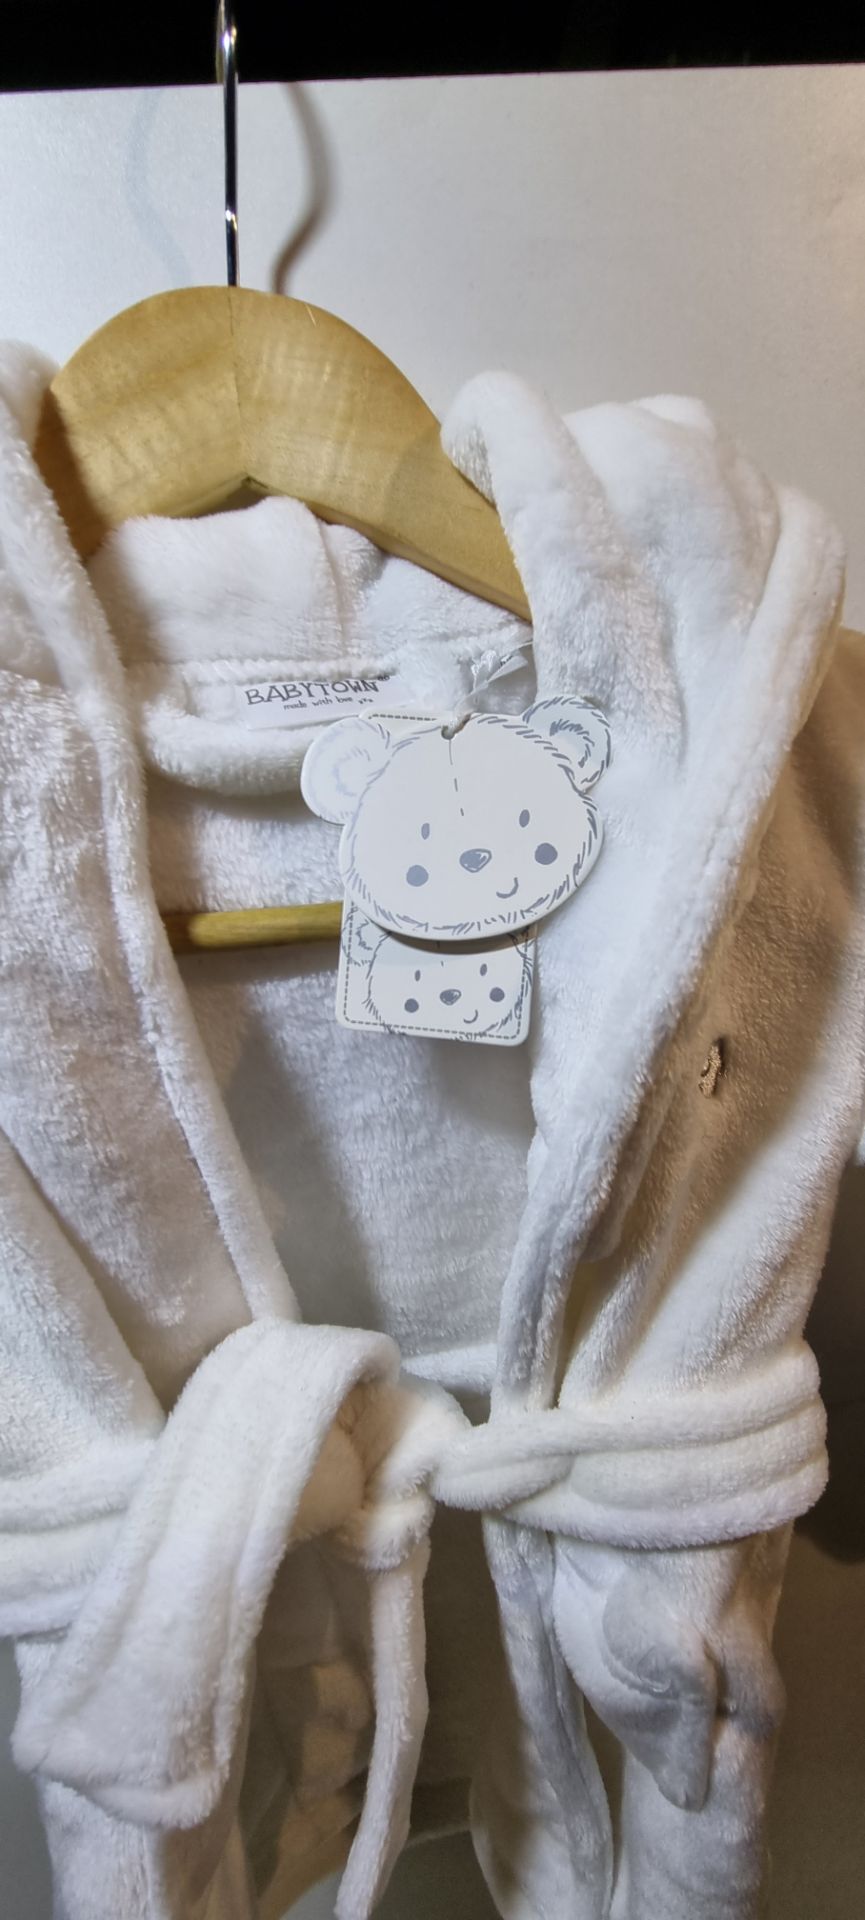 3 x Babytown White Baby Dressing Gowns in Various sizes - Image 4 of 4